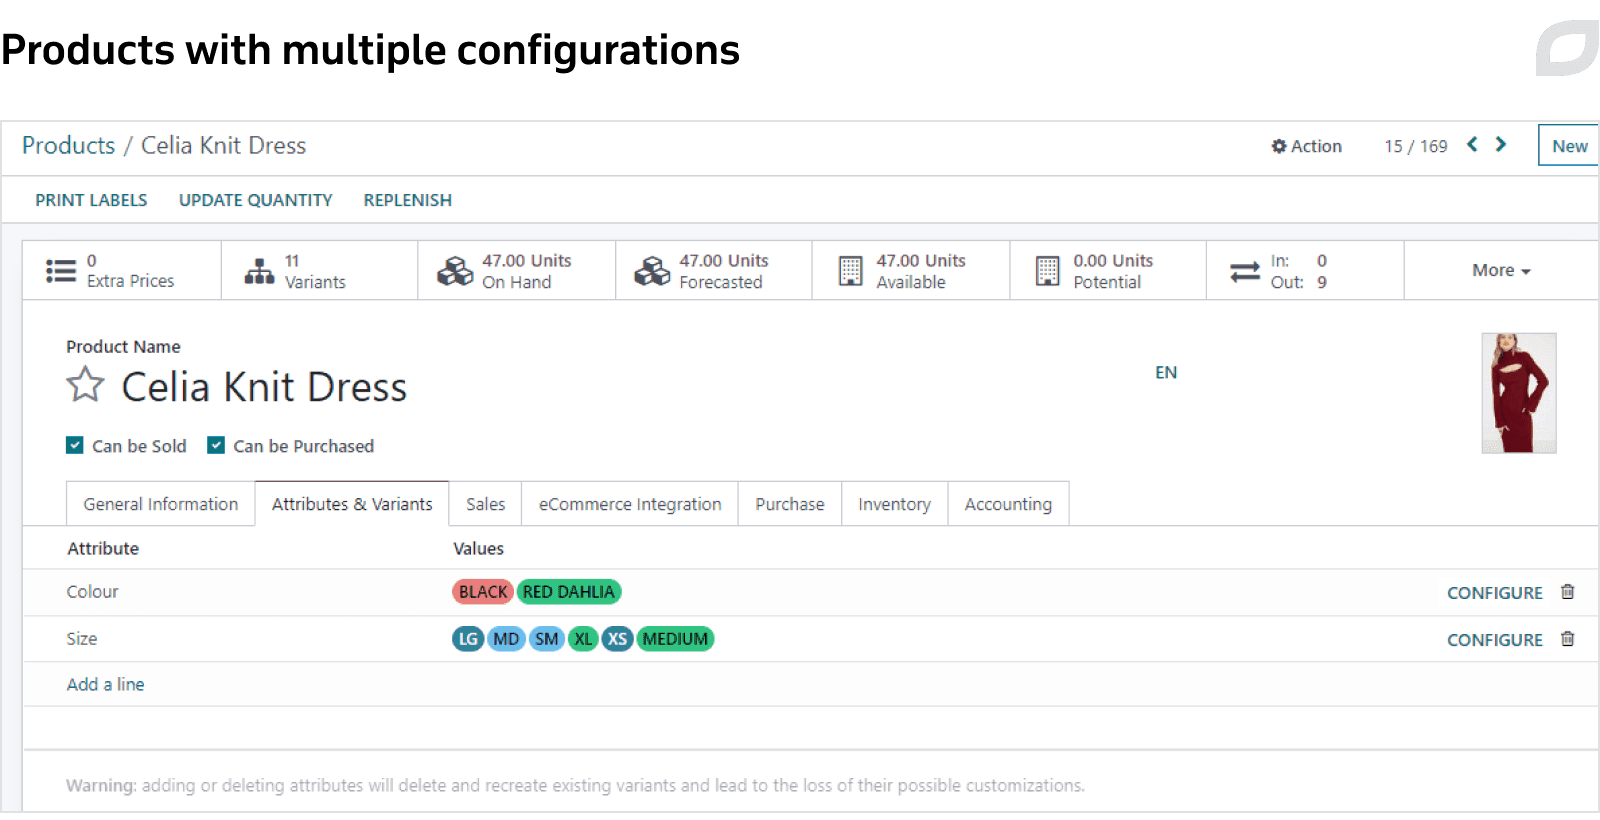 Products with multiple configurations